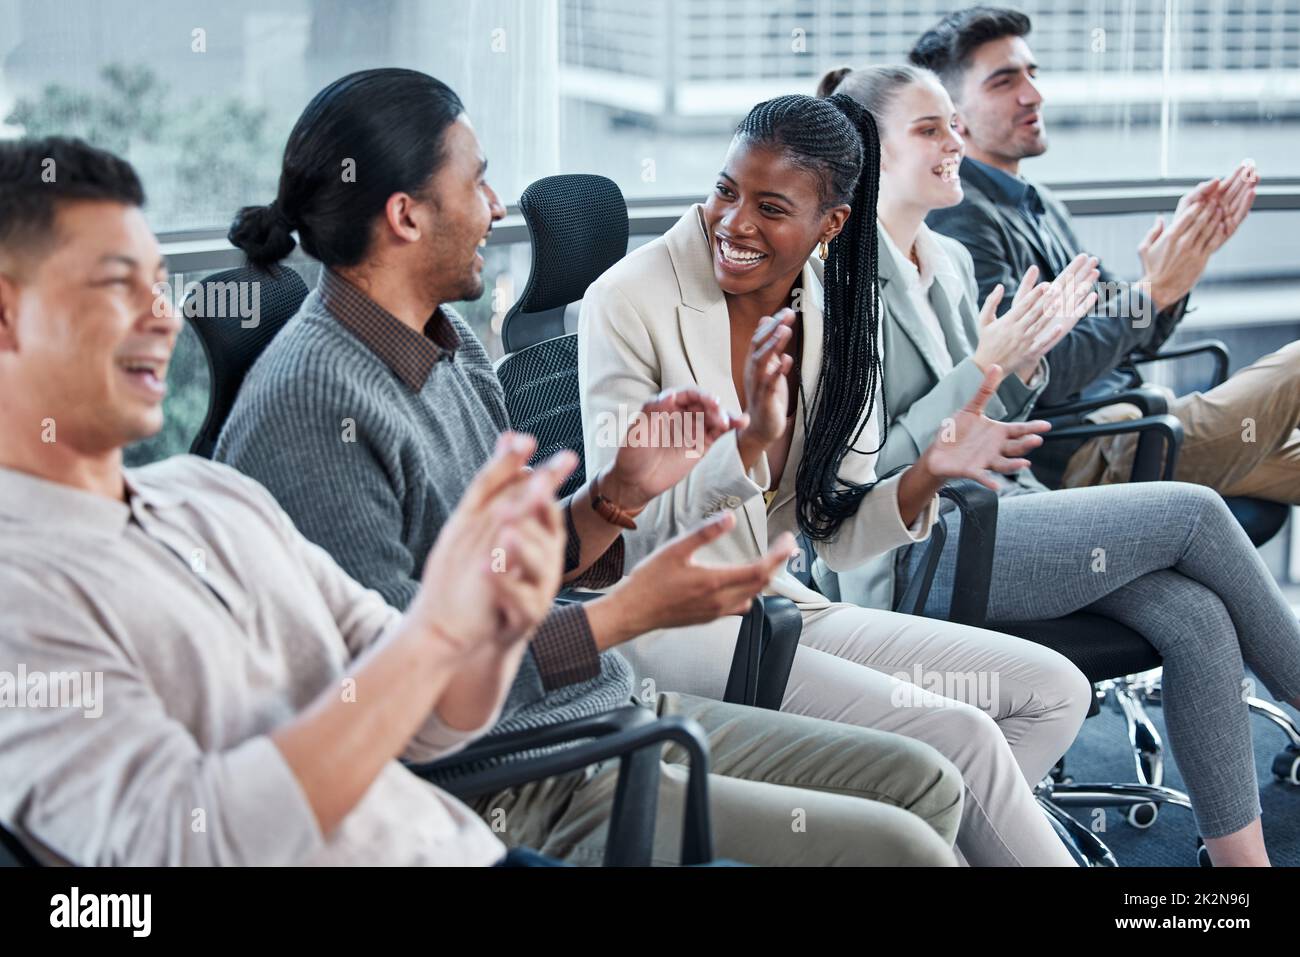 Clap for others while you wait for your turn. Shot of a group of businesspeople having a meeting in a boardroom at work. Stock Photo